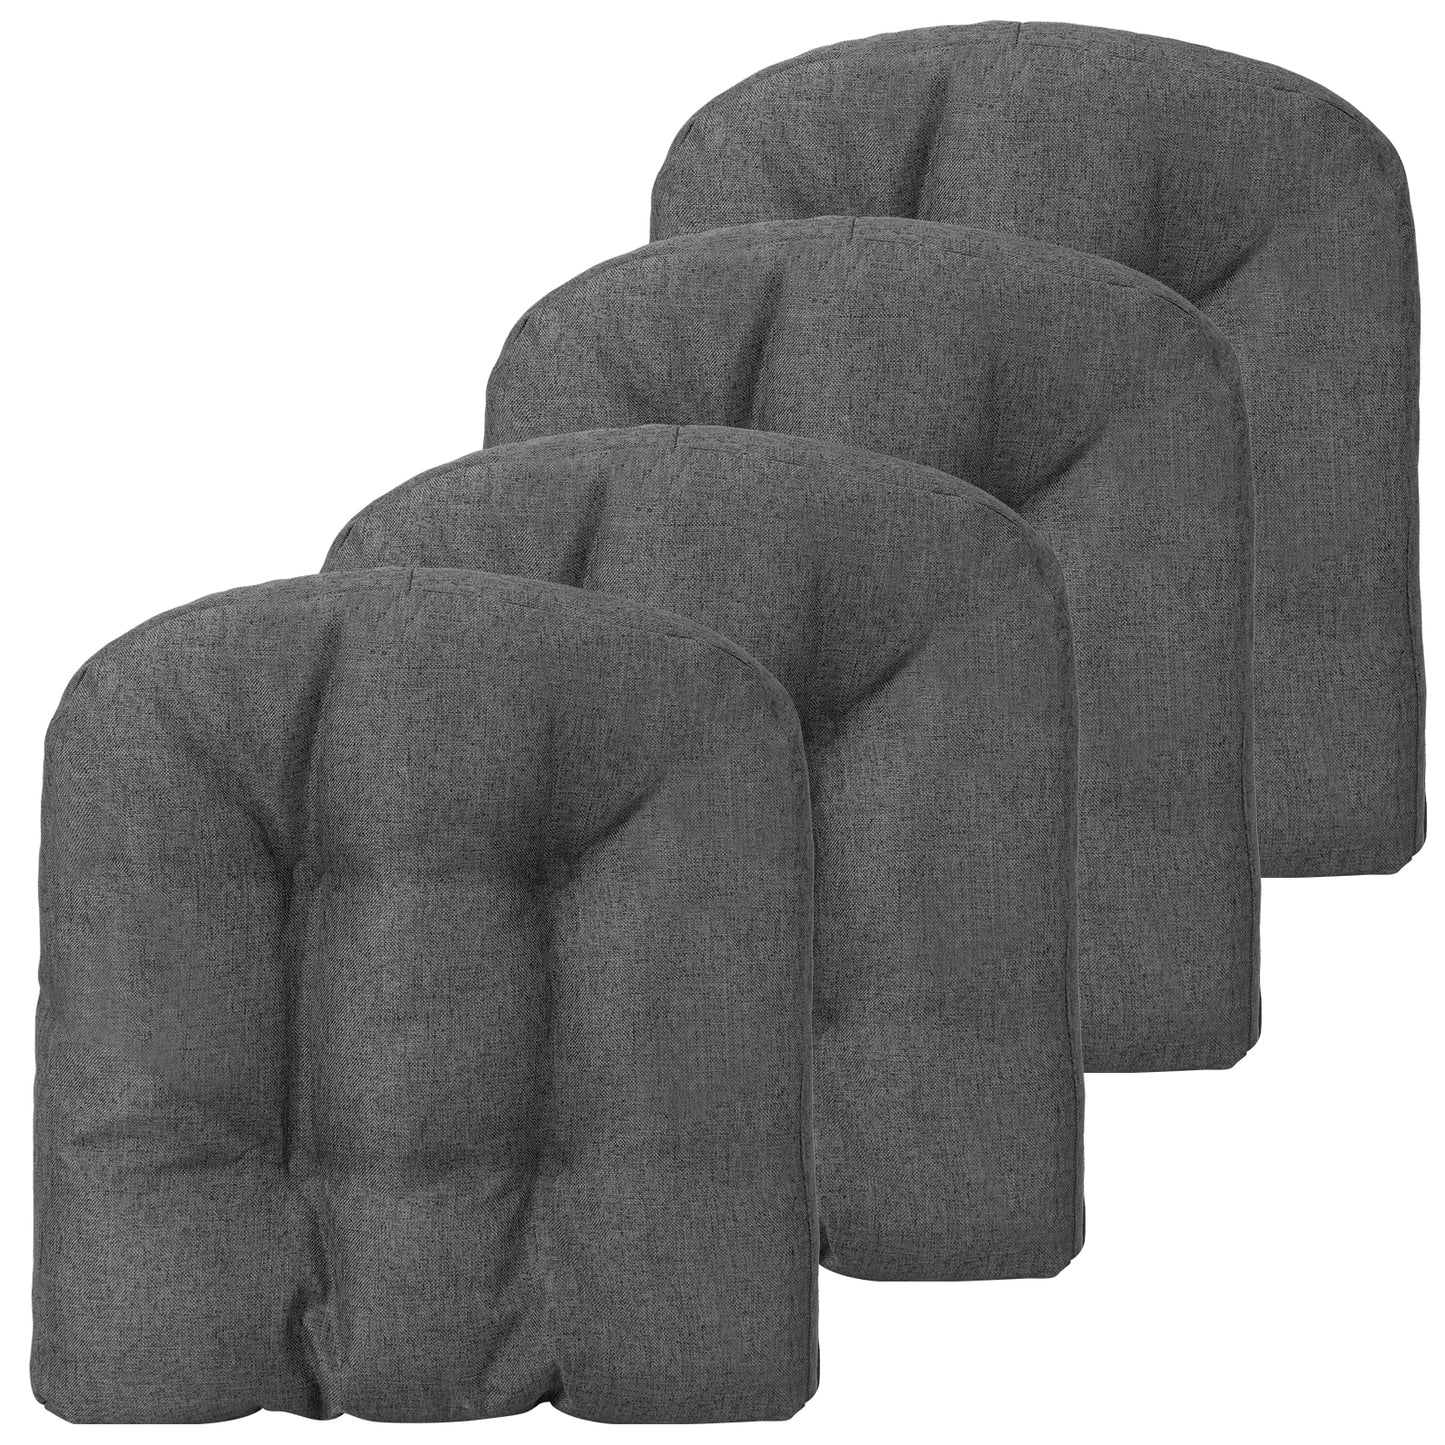 4 Pack 17.5 x 17 Inch U-Shaped Chair Pads with Polyester Cover-Gray